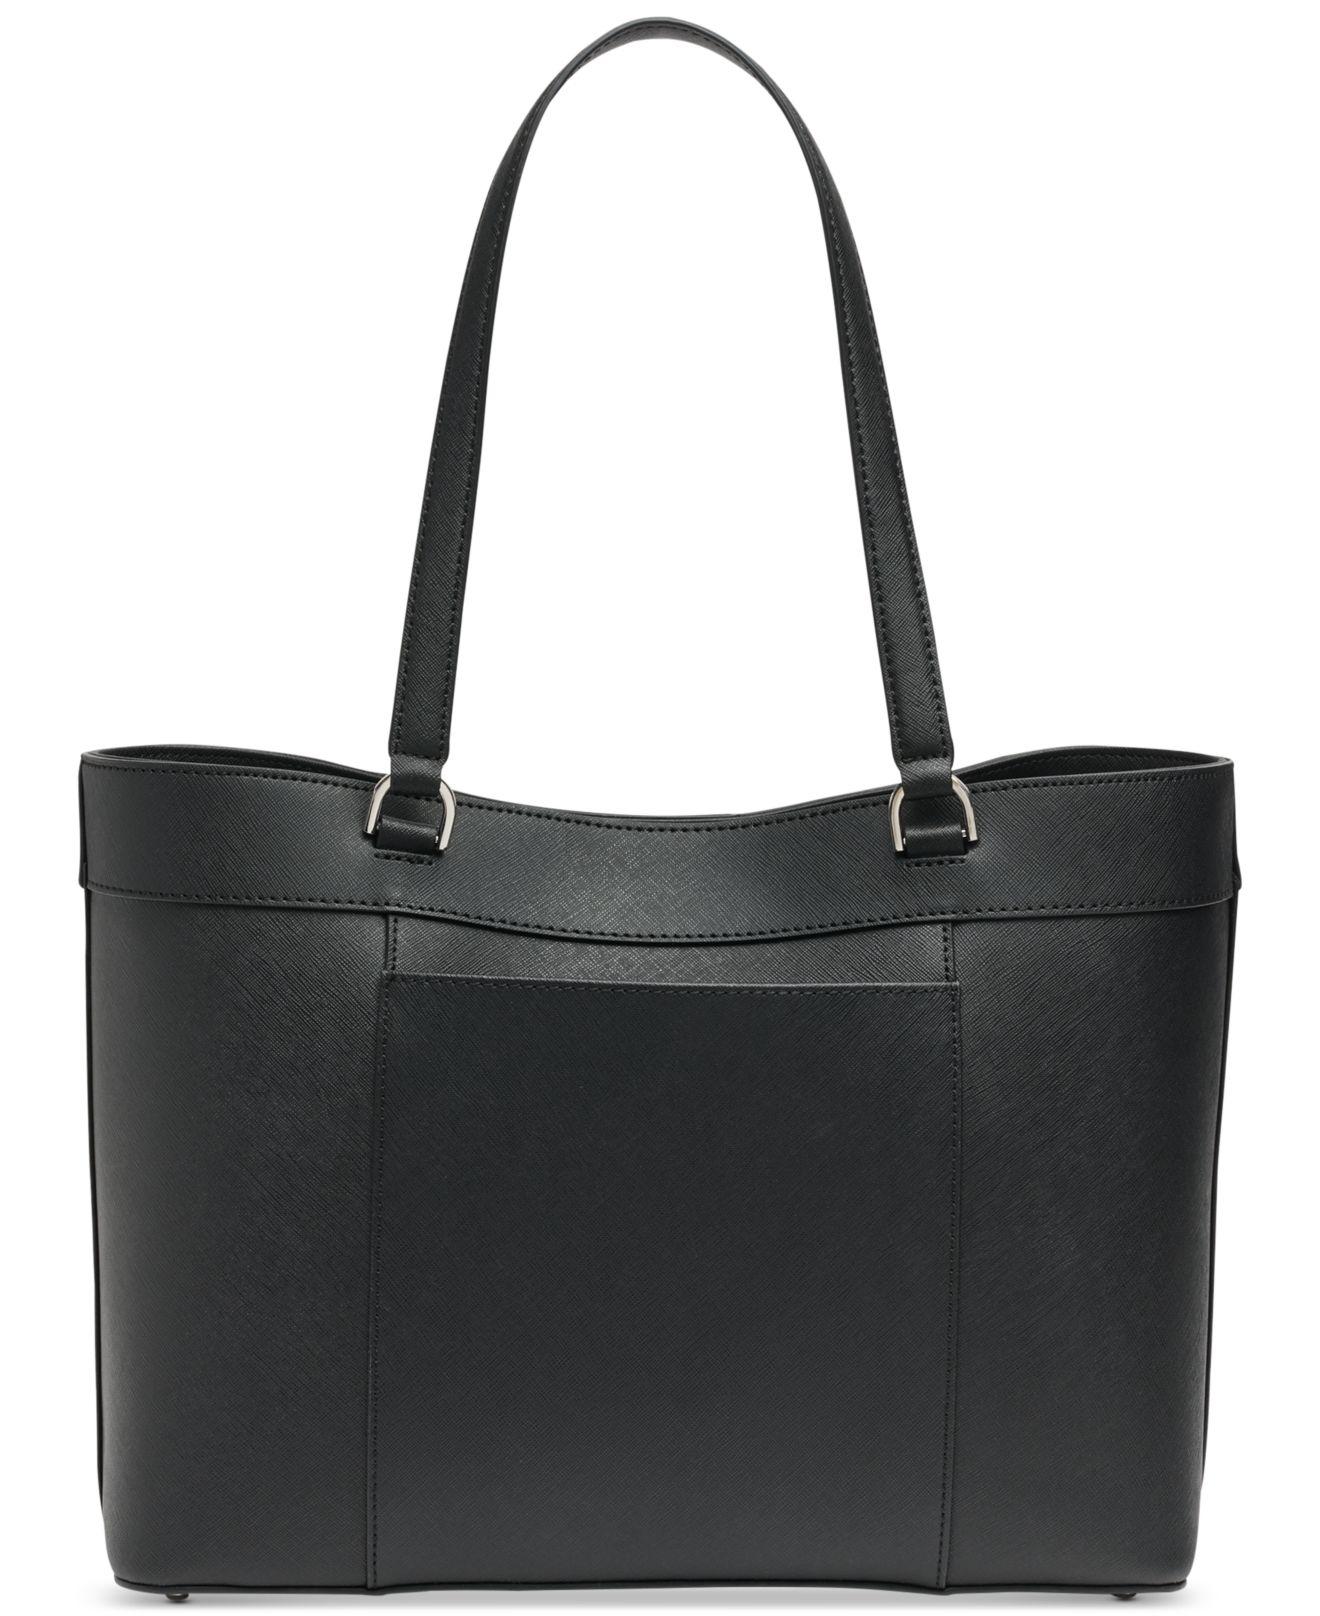 Calvin Klein Louise Leather Tote in Black - Lyst